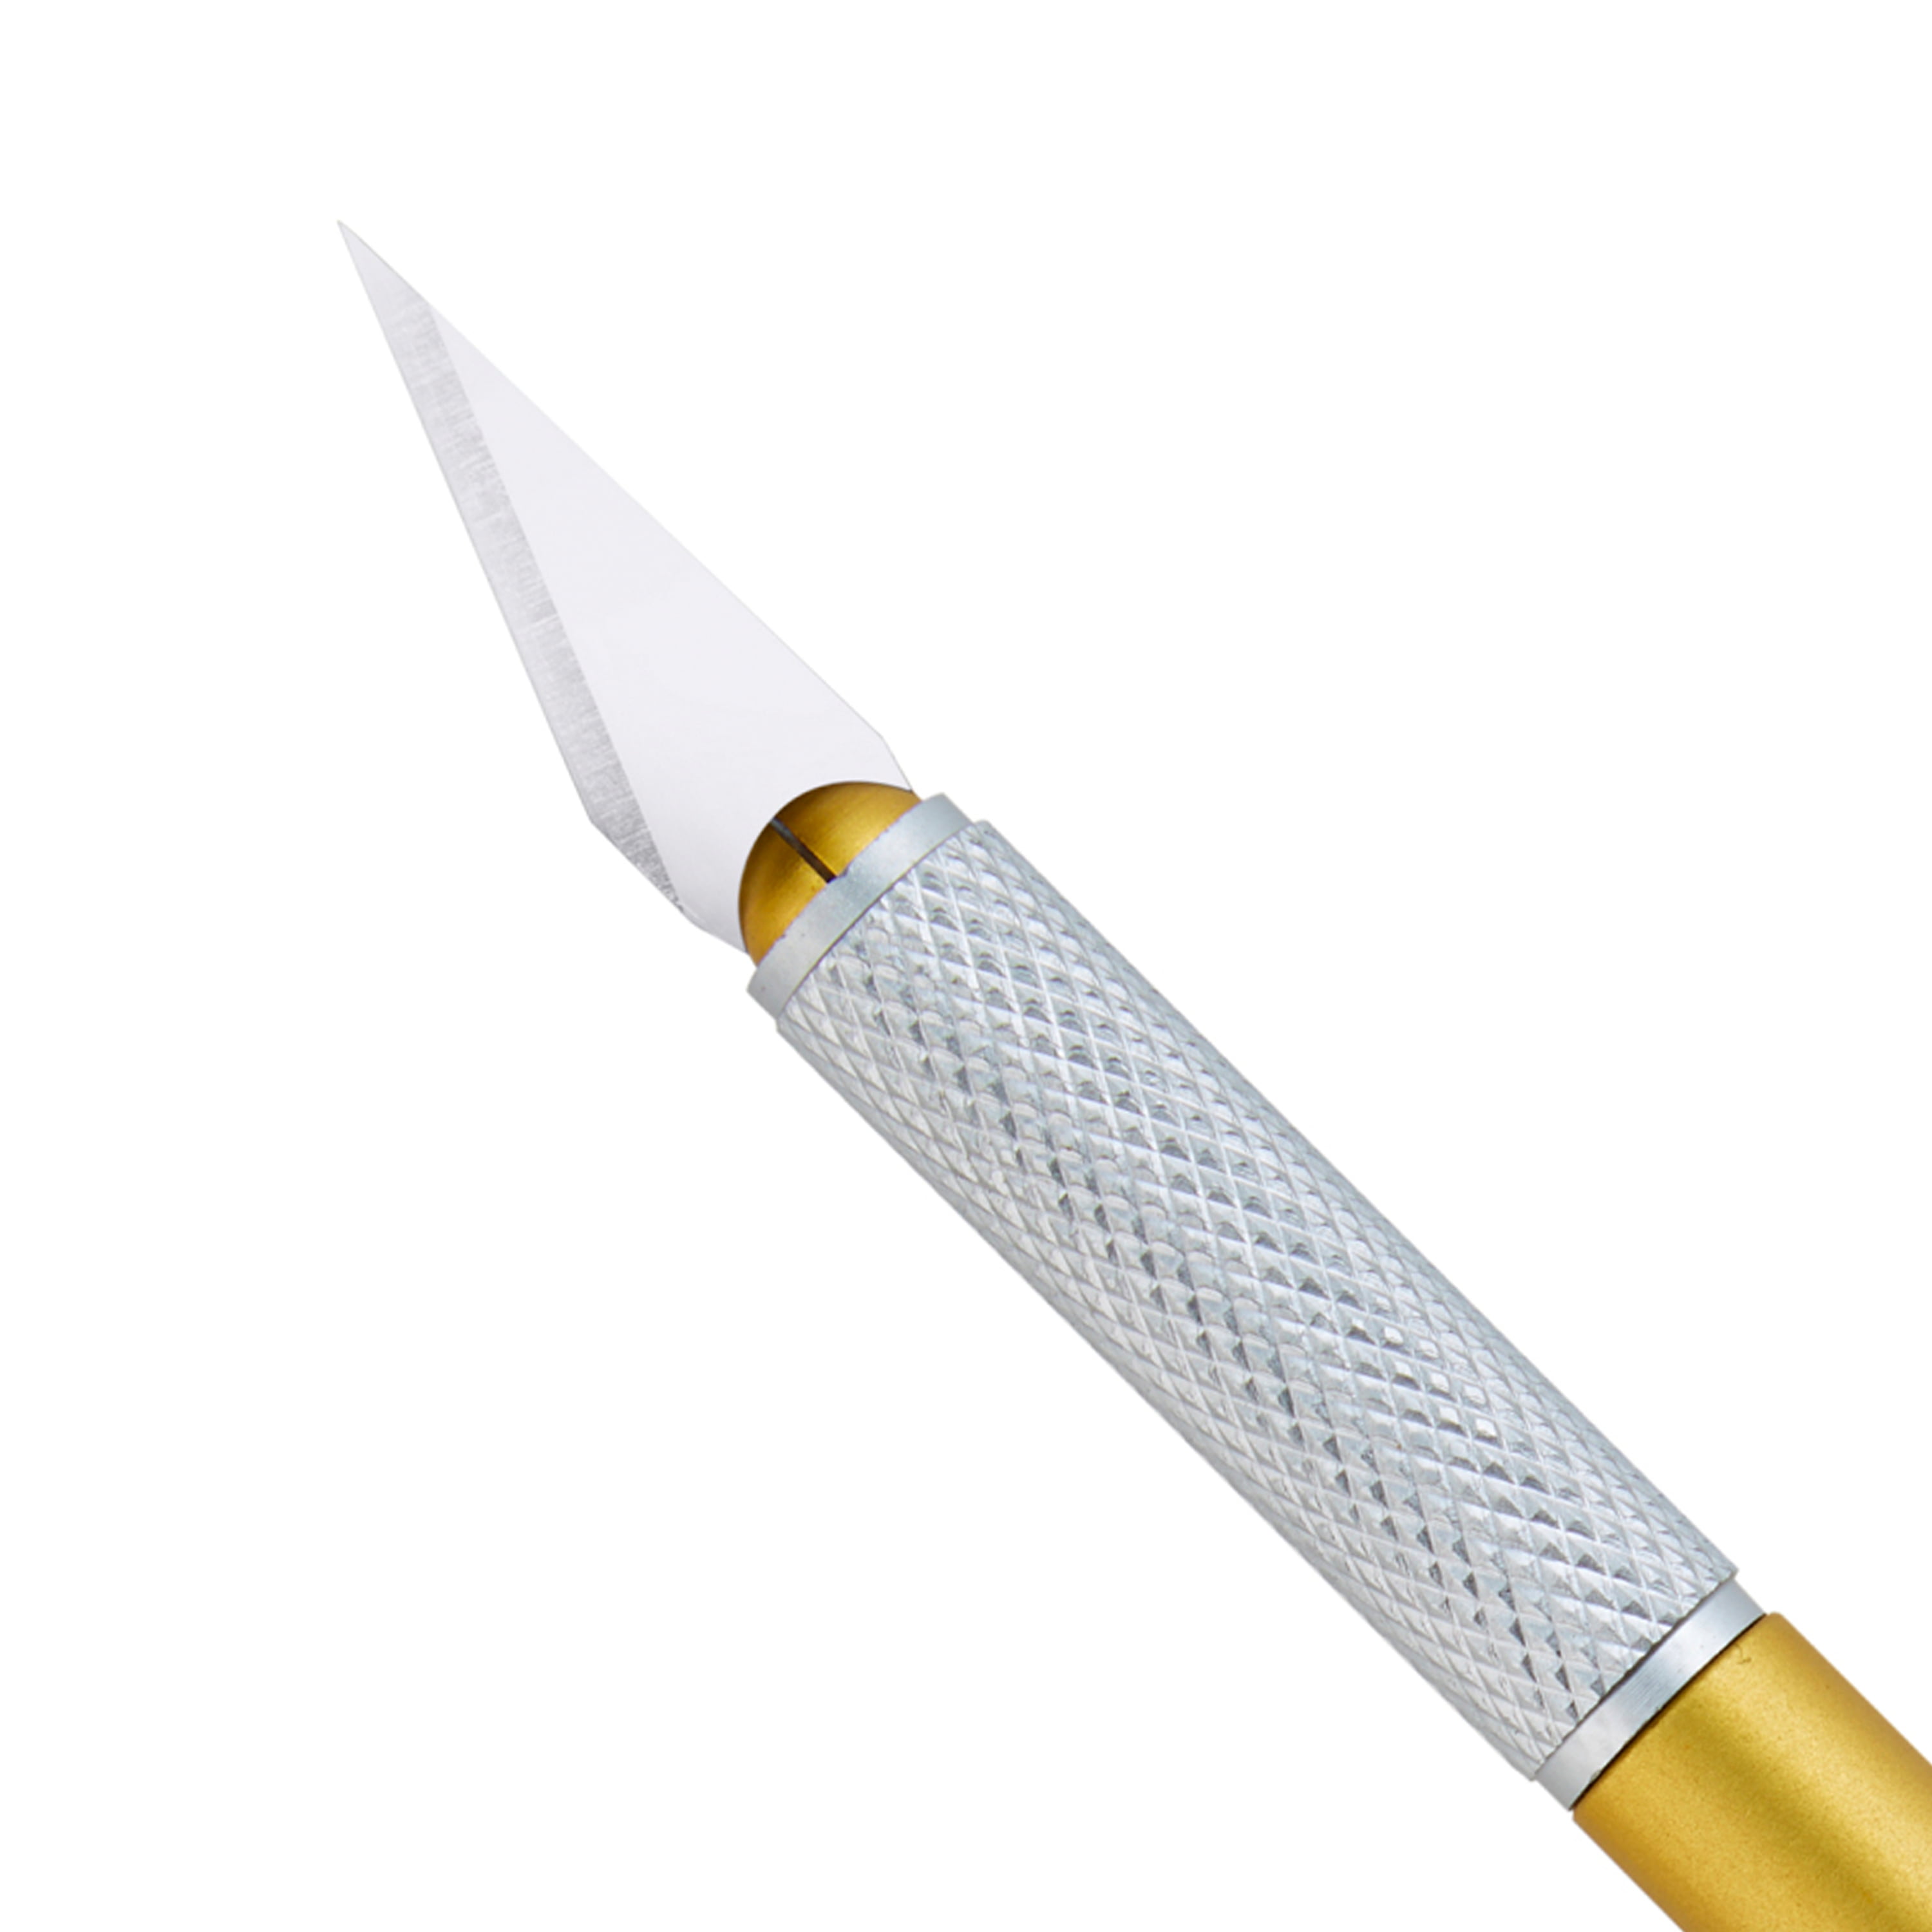 Westcott Carbo Titanium Craft Knife, for Office/Craft, Gold, 1